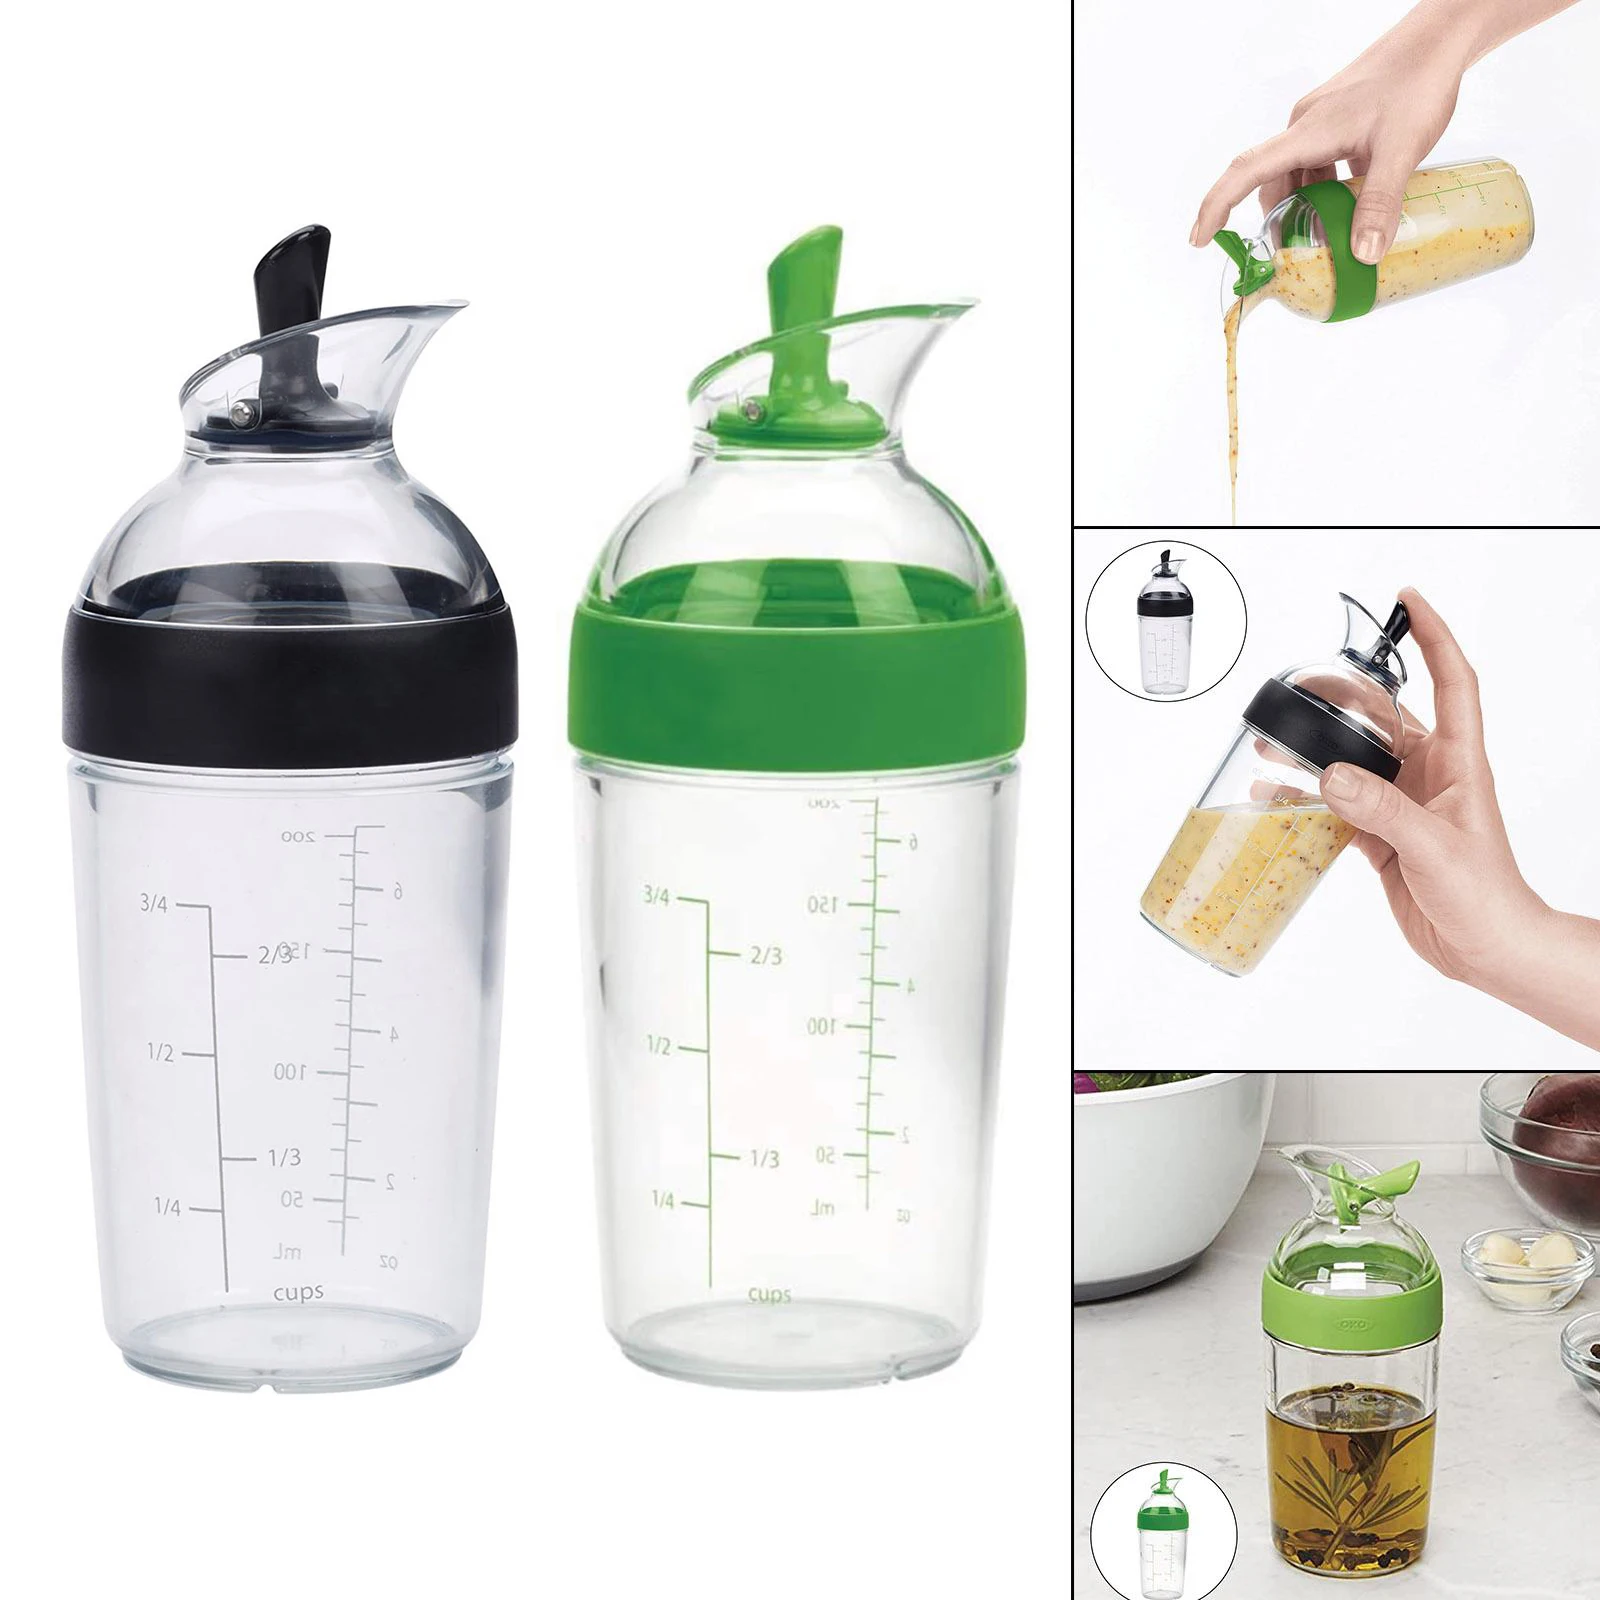 

1pc Salad Dressing Shaker Emulsifier Universal Manual Sauces Mixer Spill Resistant 240ml with Measurement